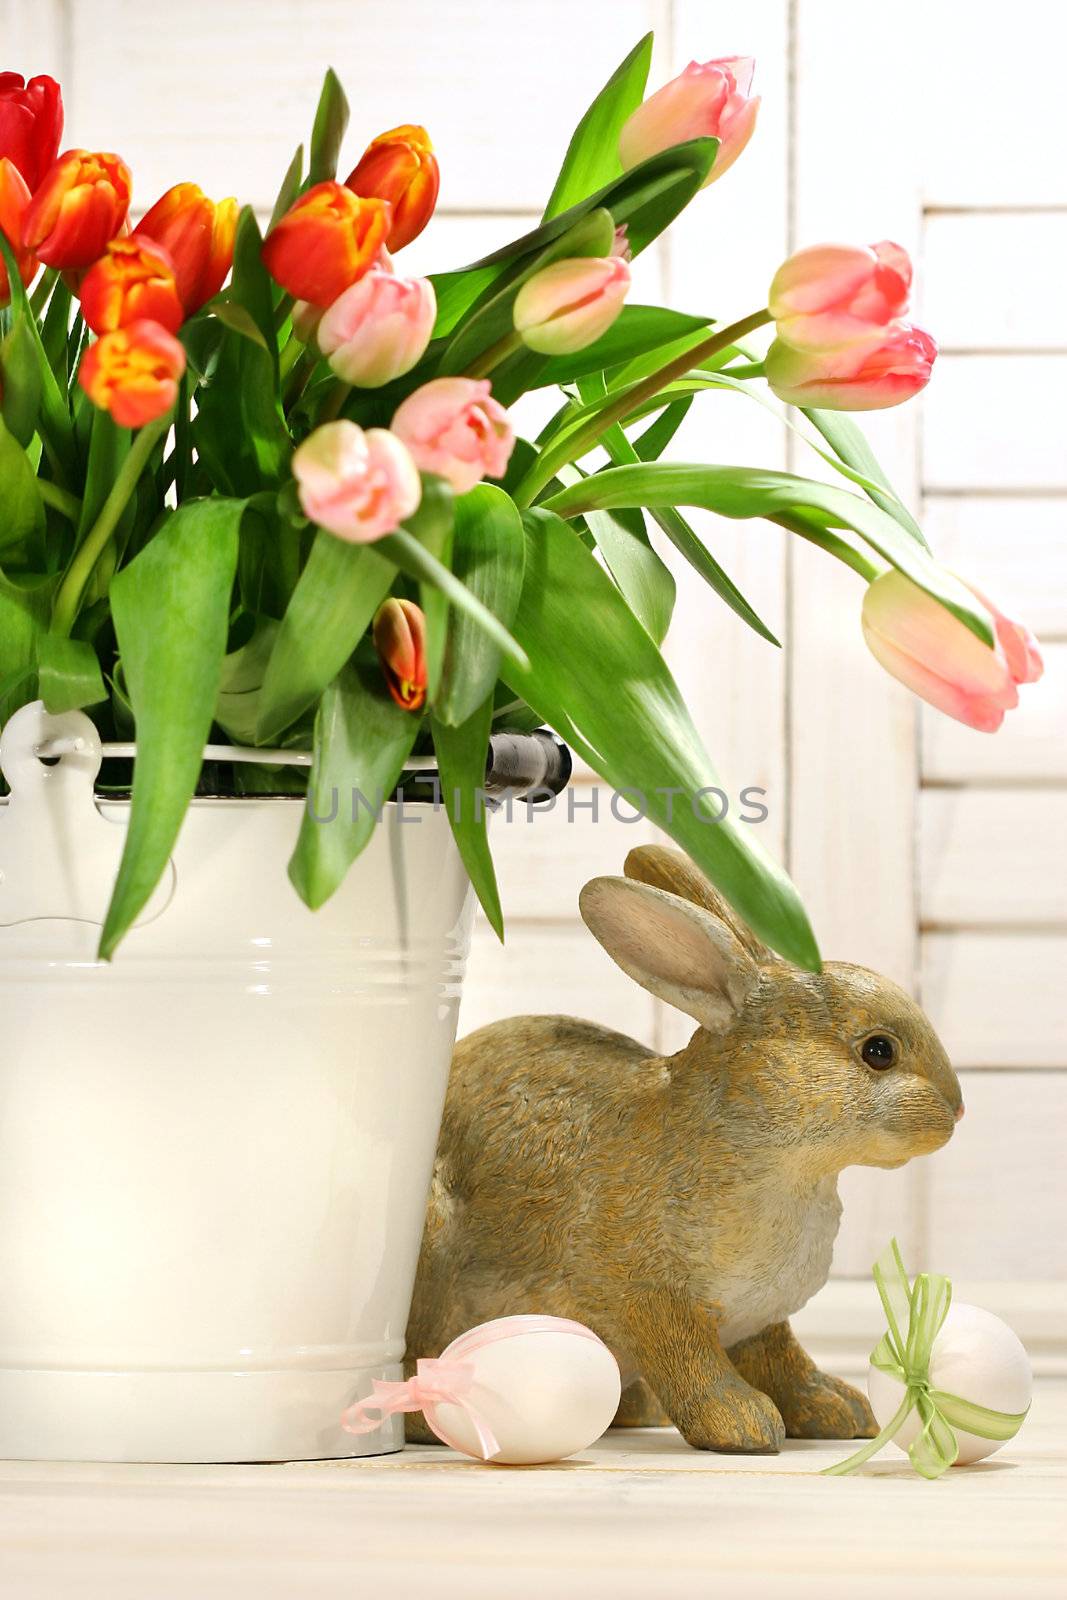 Rabbit hiding behind a container of tulips by Sandralise